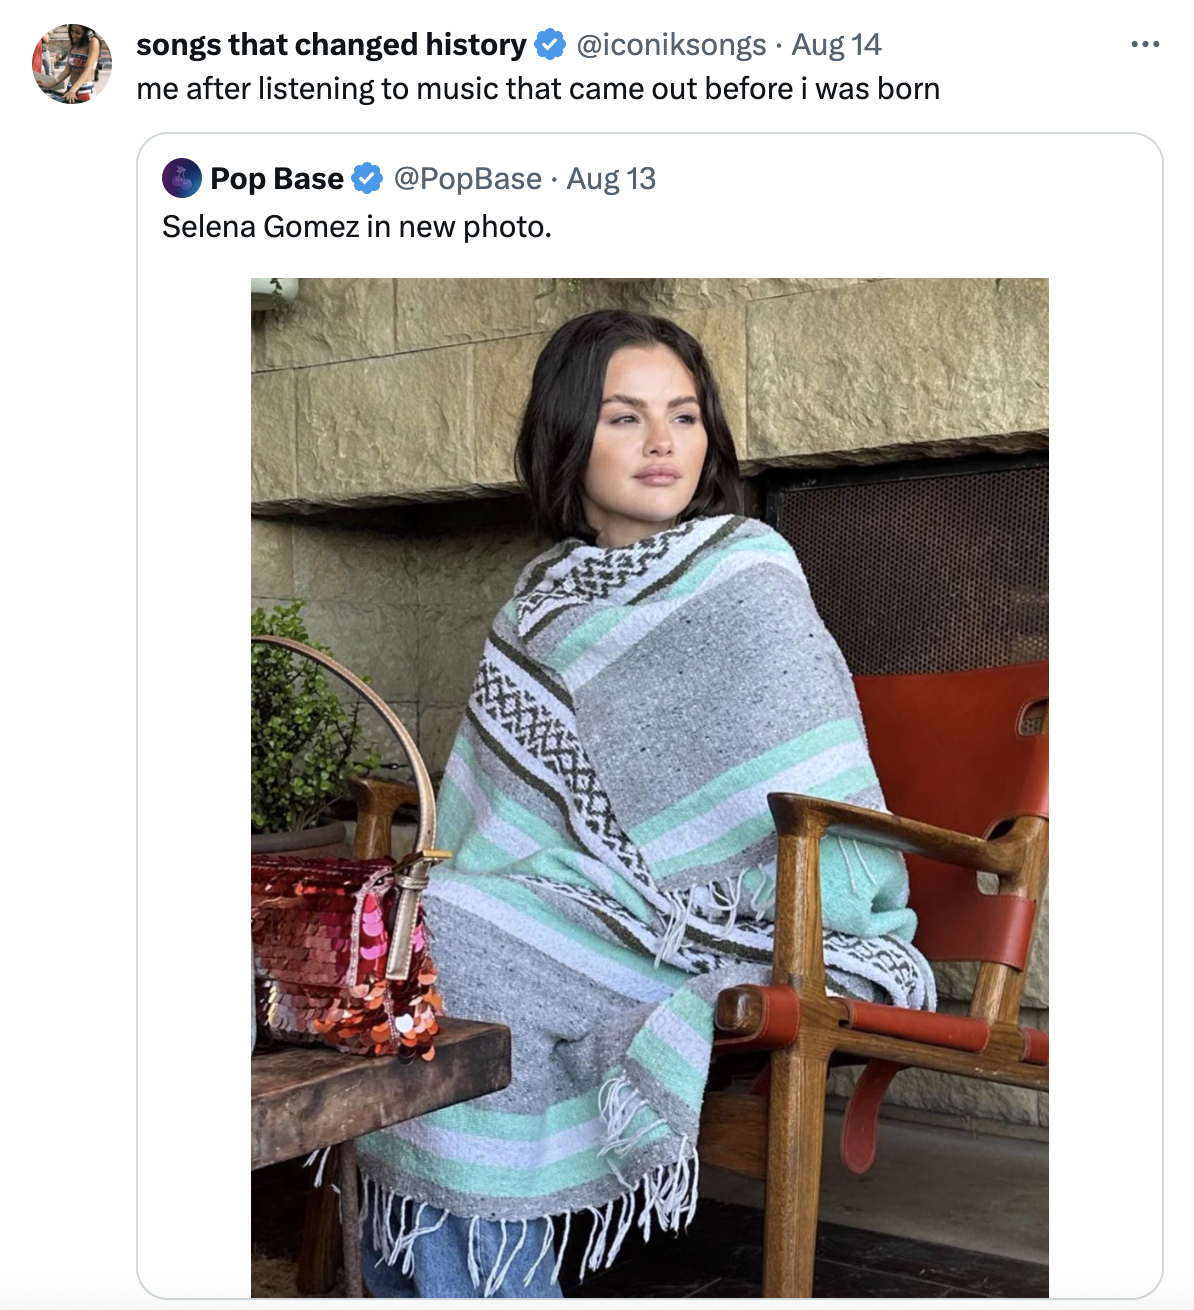 selena gomez in a blanket - stole - songs that changed history Aug 14 me after listening to music that came out before i was born Pop Base Aug 13 Selena Gomez in new photo.